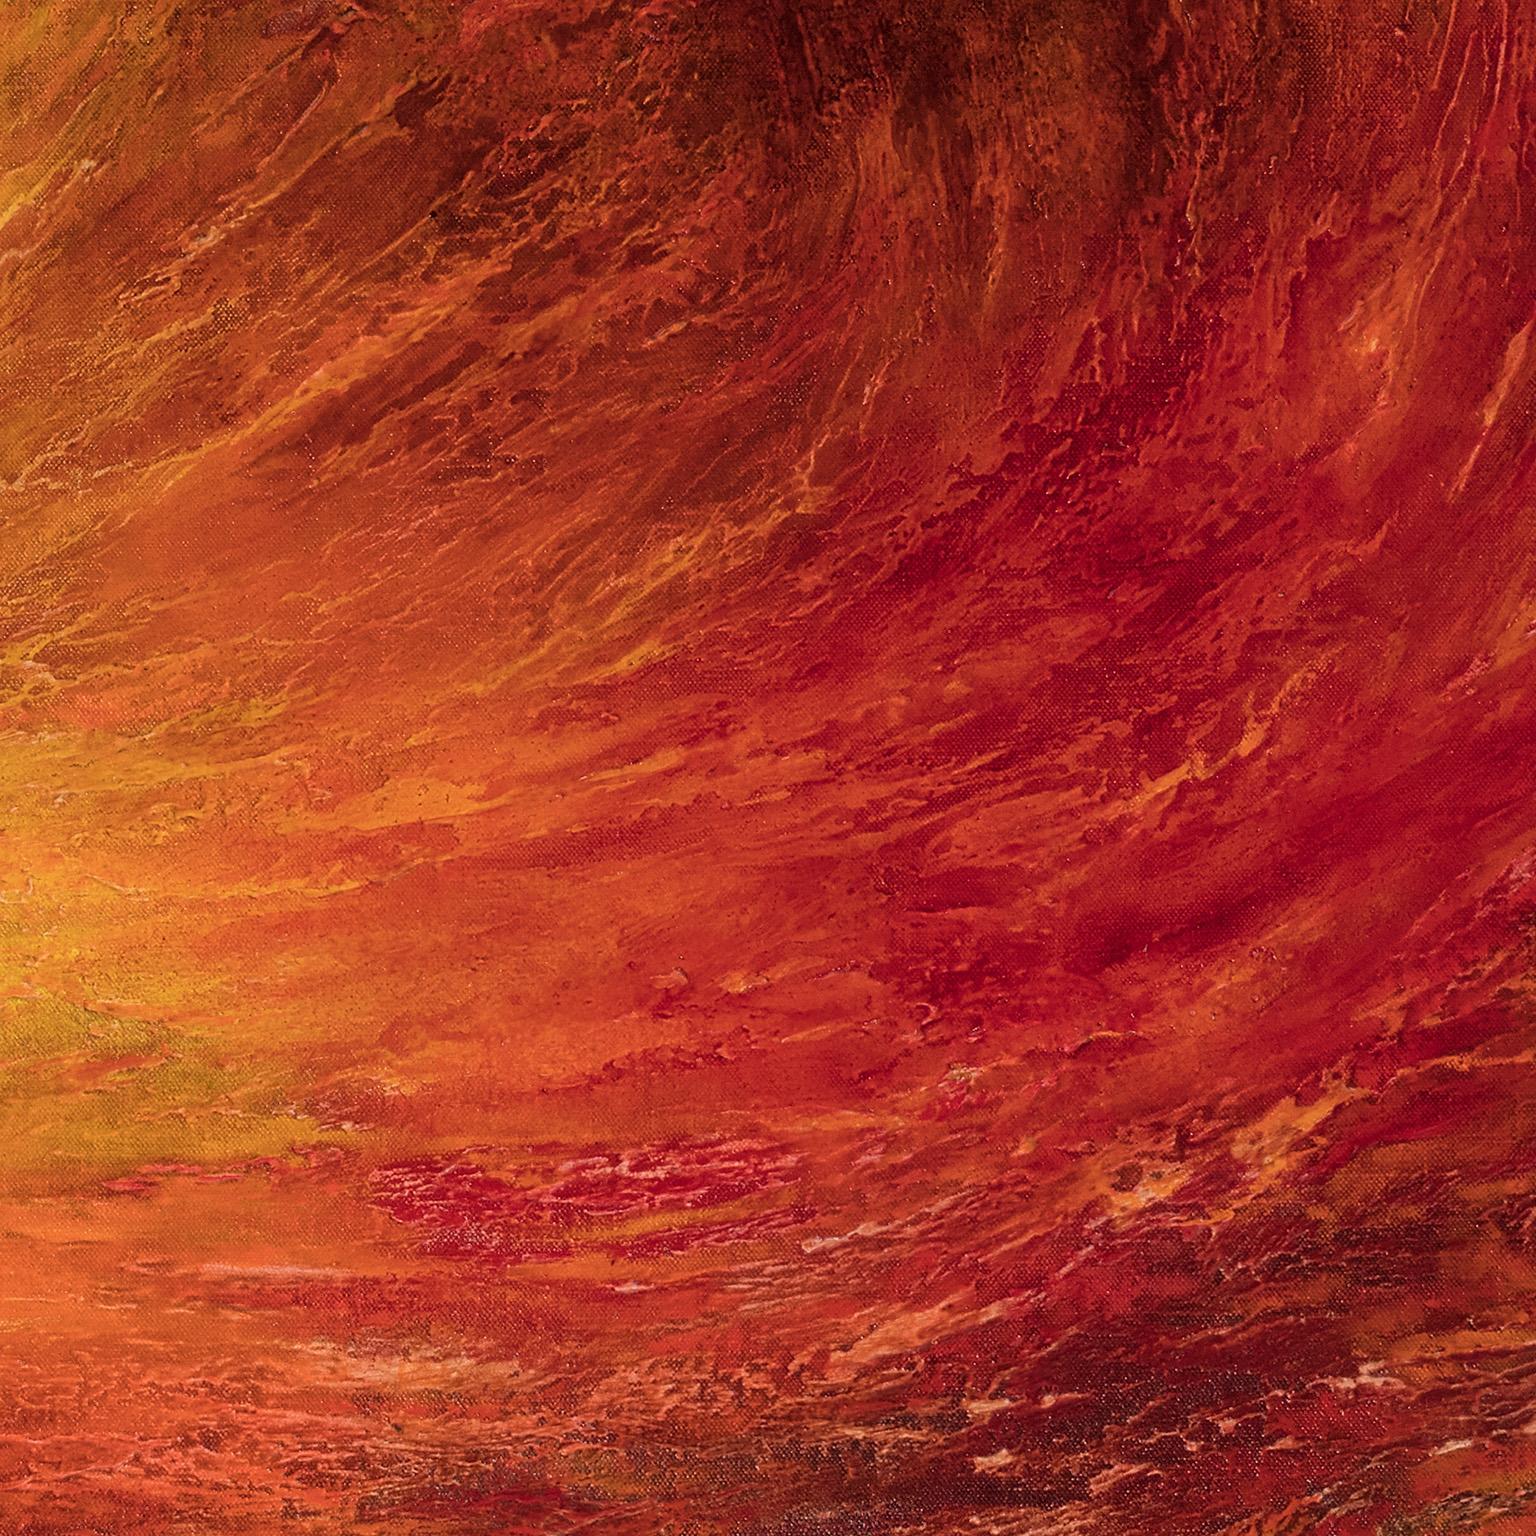 Occasus (Sunset) - Abstract Gestural Oil Painting with Red and Orange - Brown Abstract Painting by Ruggero Vanni